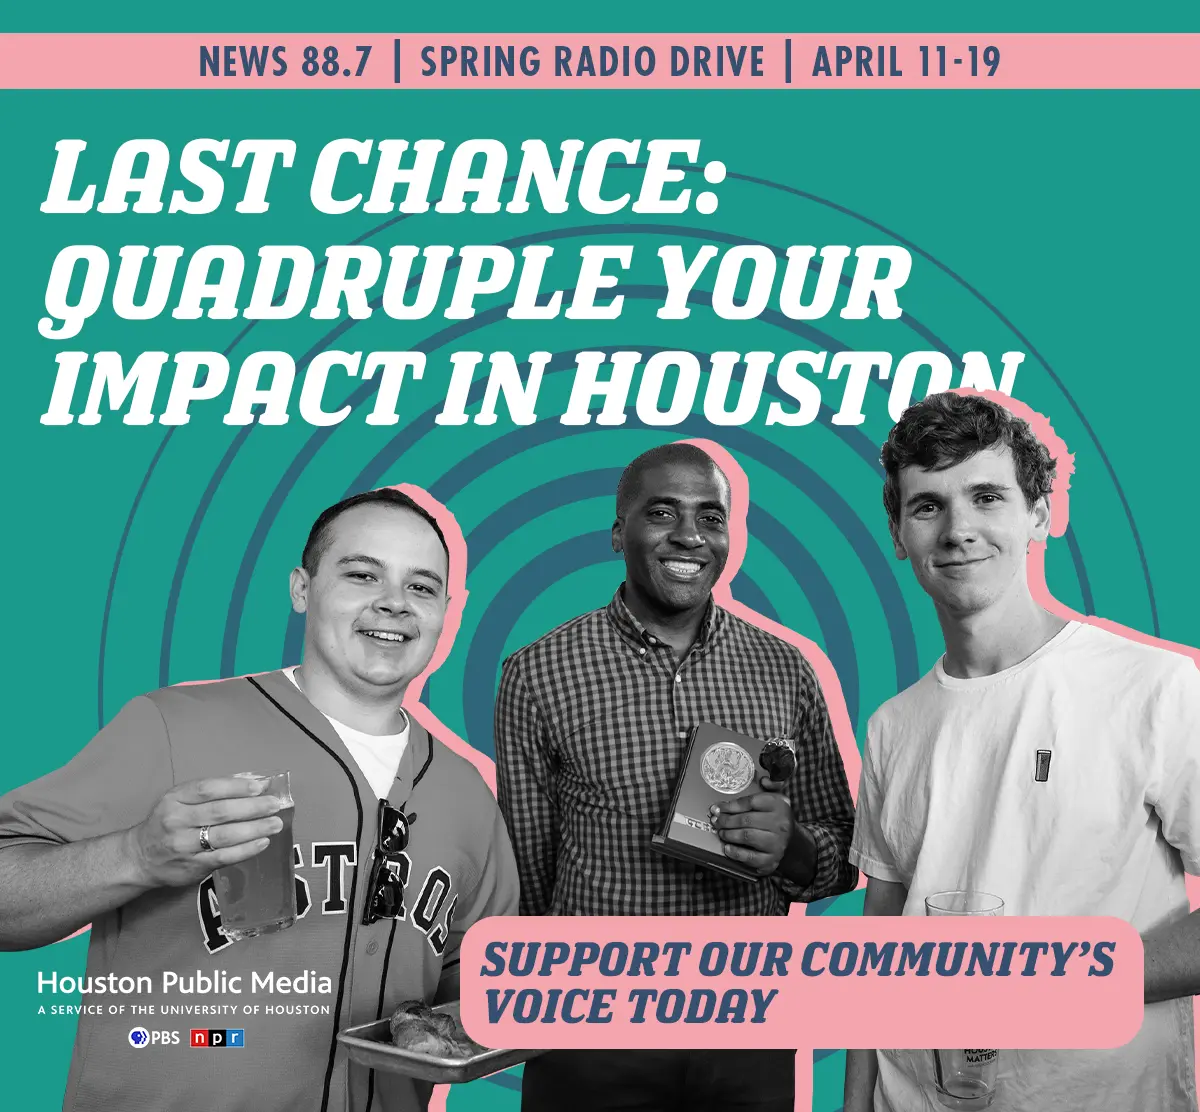 Last chance: quadruple your impact in Houston. Support our community\'s voice today